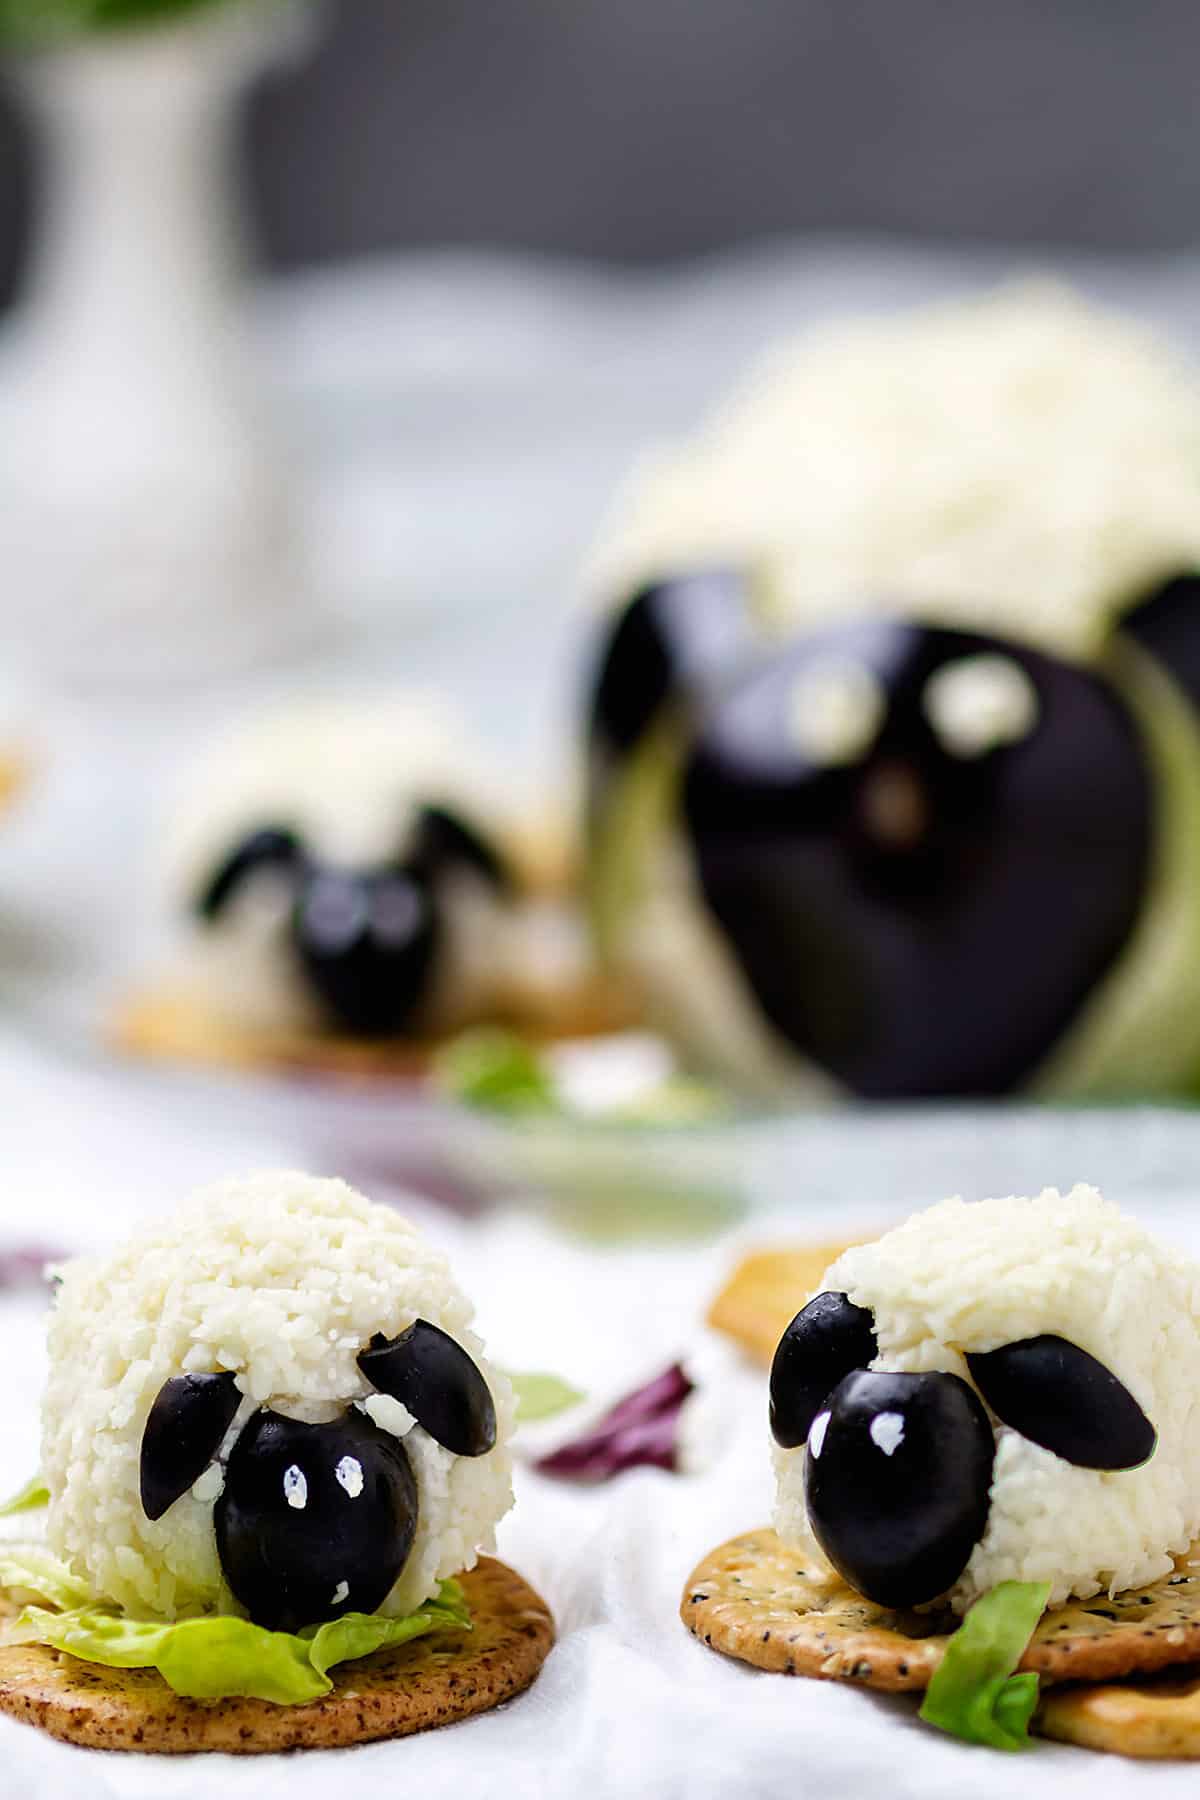 Amazing lam and sheep-shaped Easter cheese balls served on crackers.